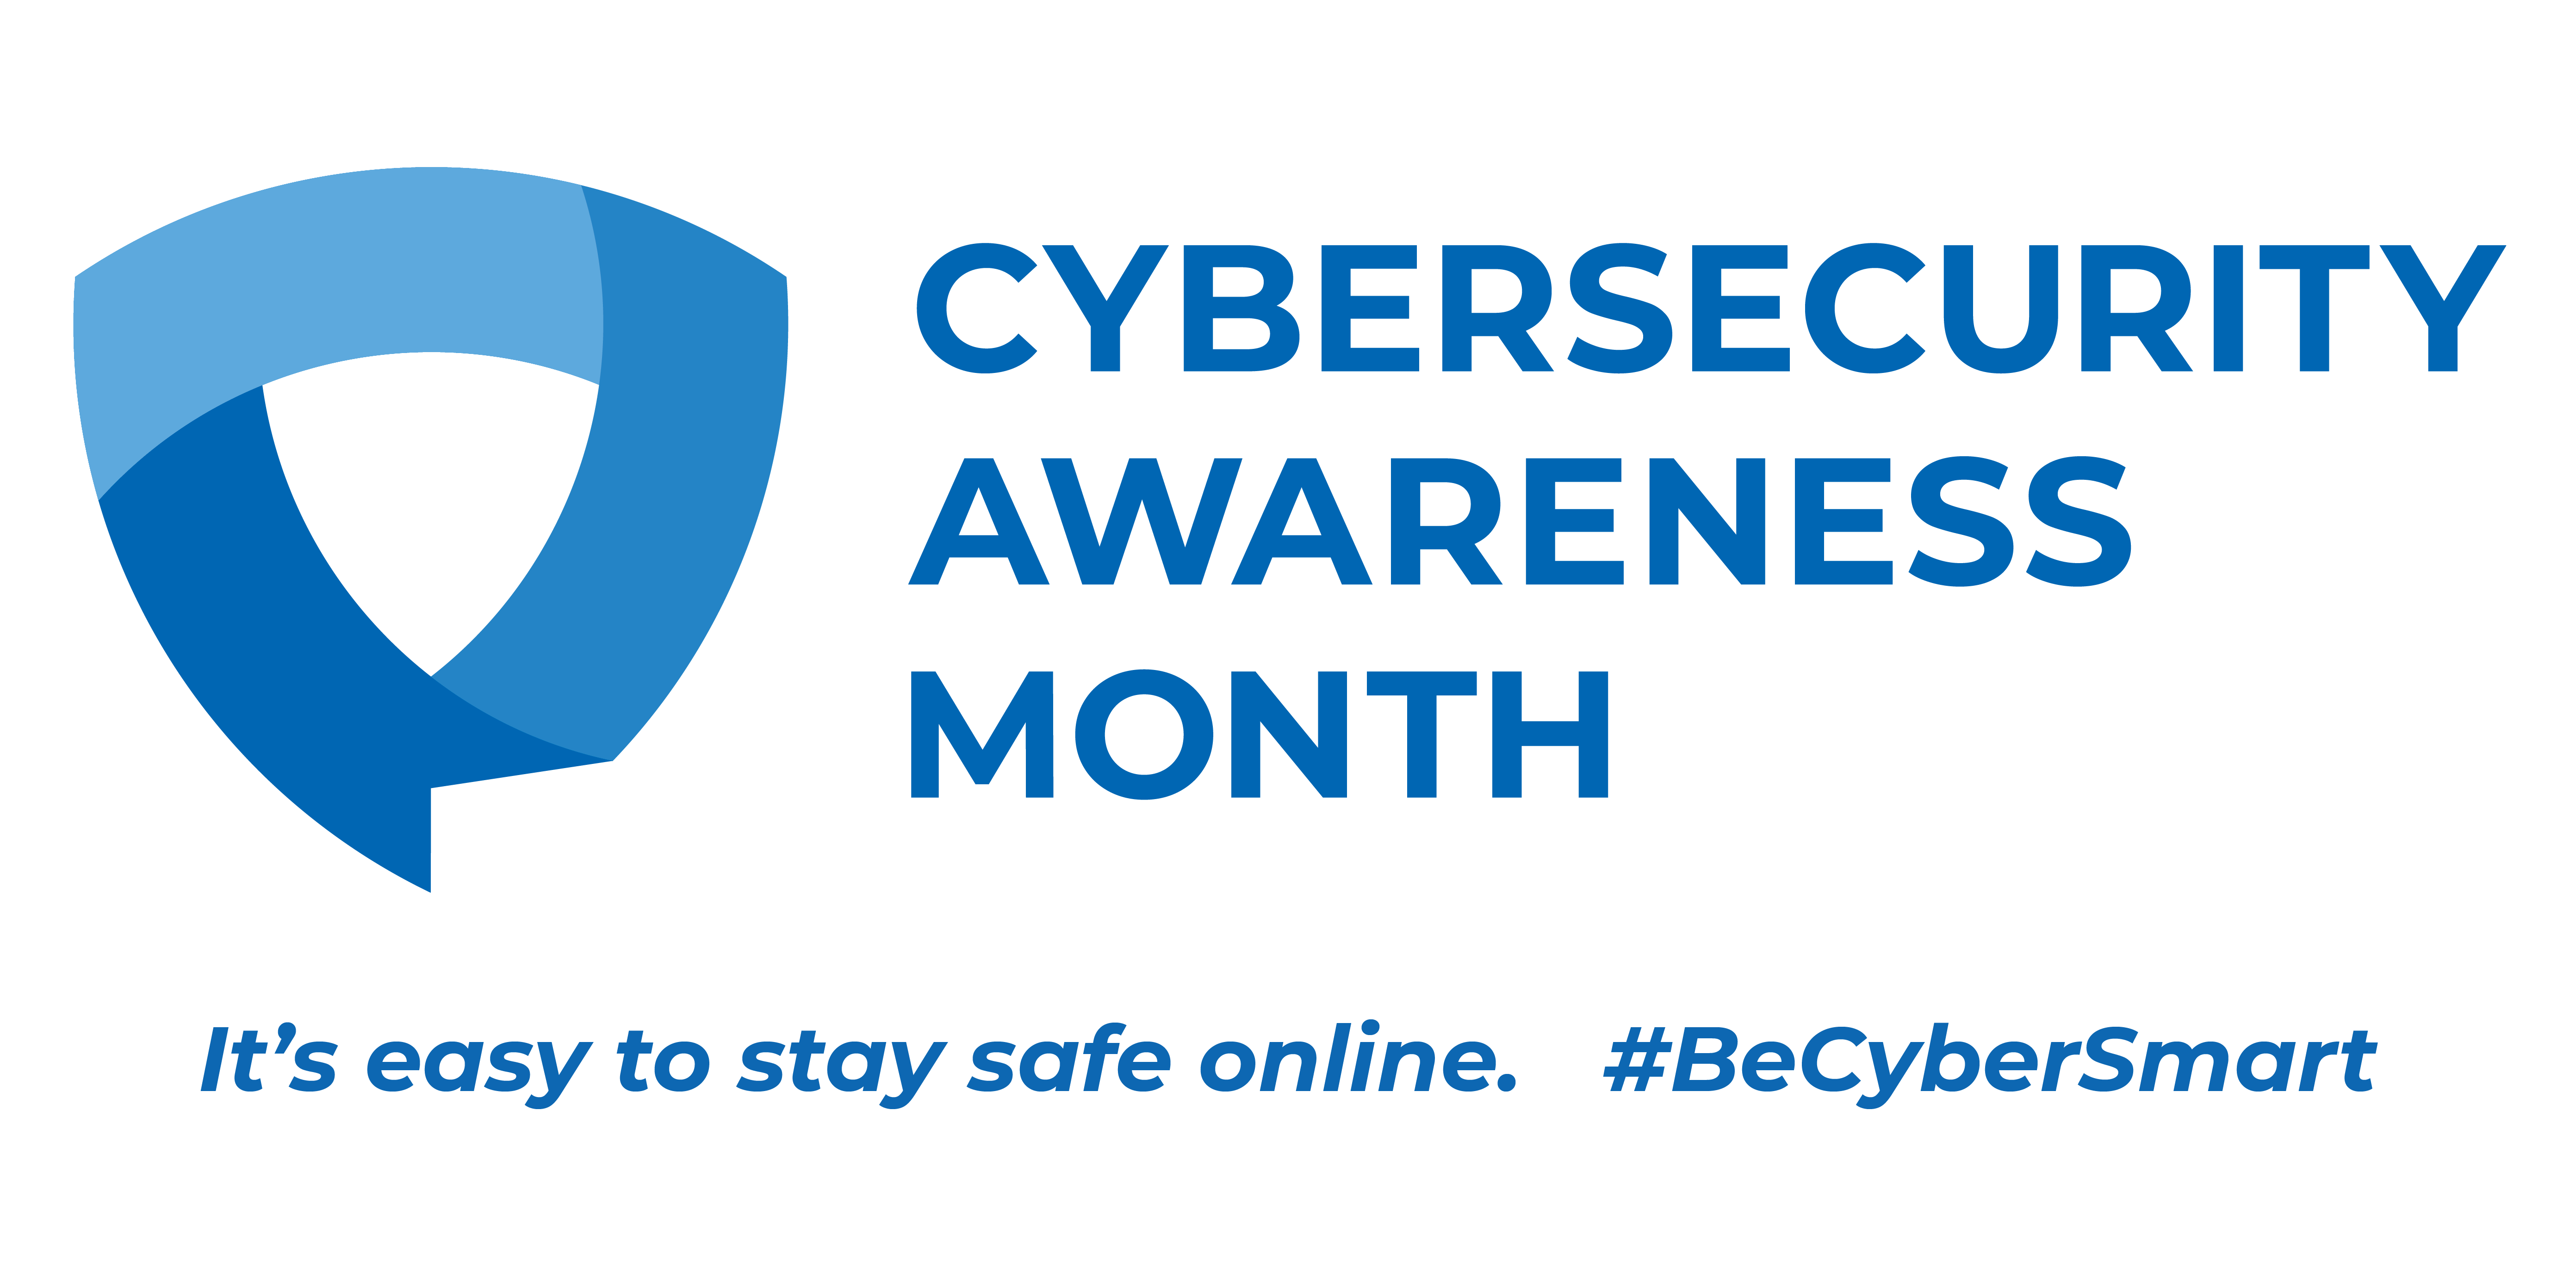 Cybersecurity Awareness Month - National Cybersecurity Alliance